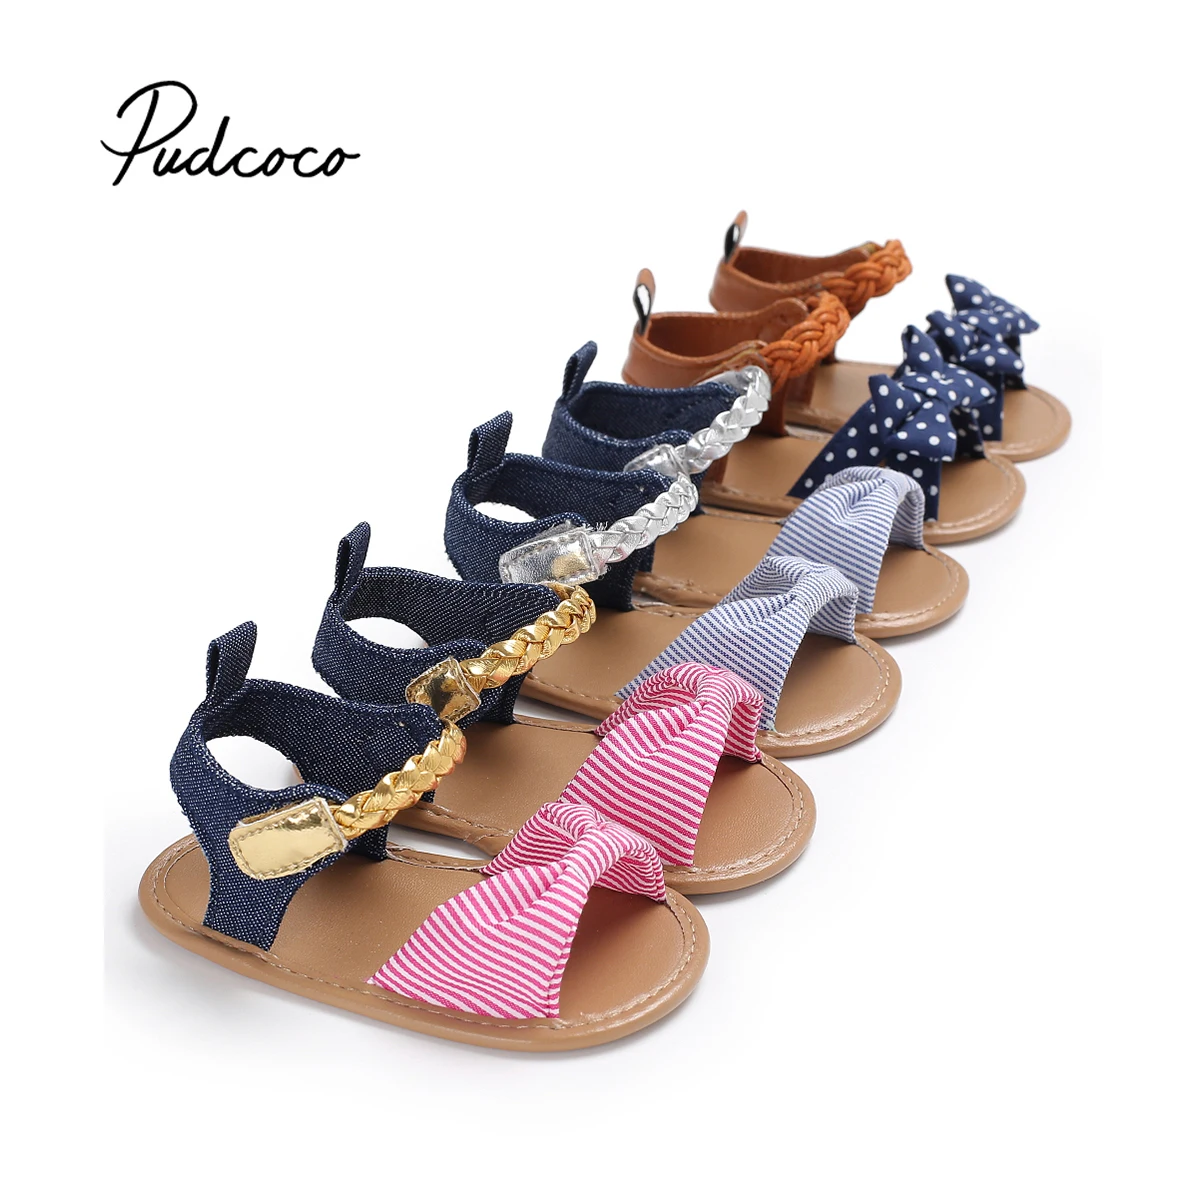 

Pudcoco Newborn Kid Baby Girl Flower Sandals Summer Casual Crib Shoes First Prewalker Clogs For 0-18M